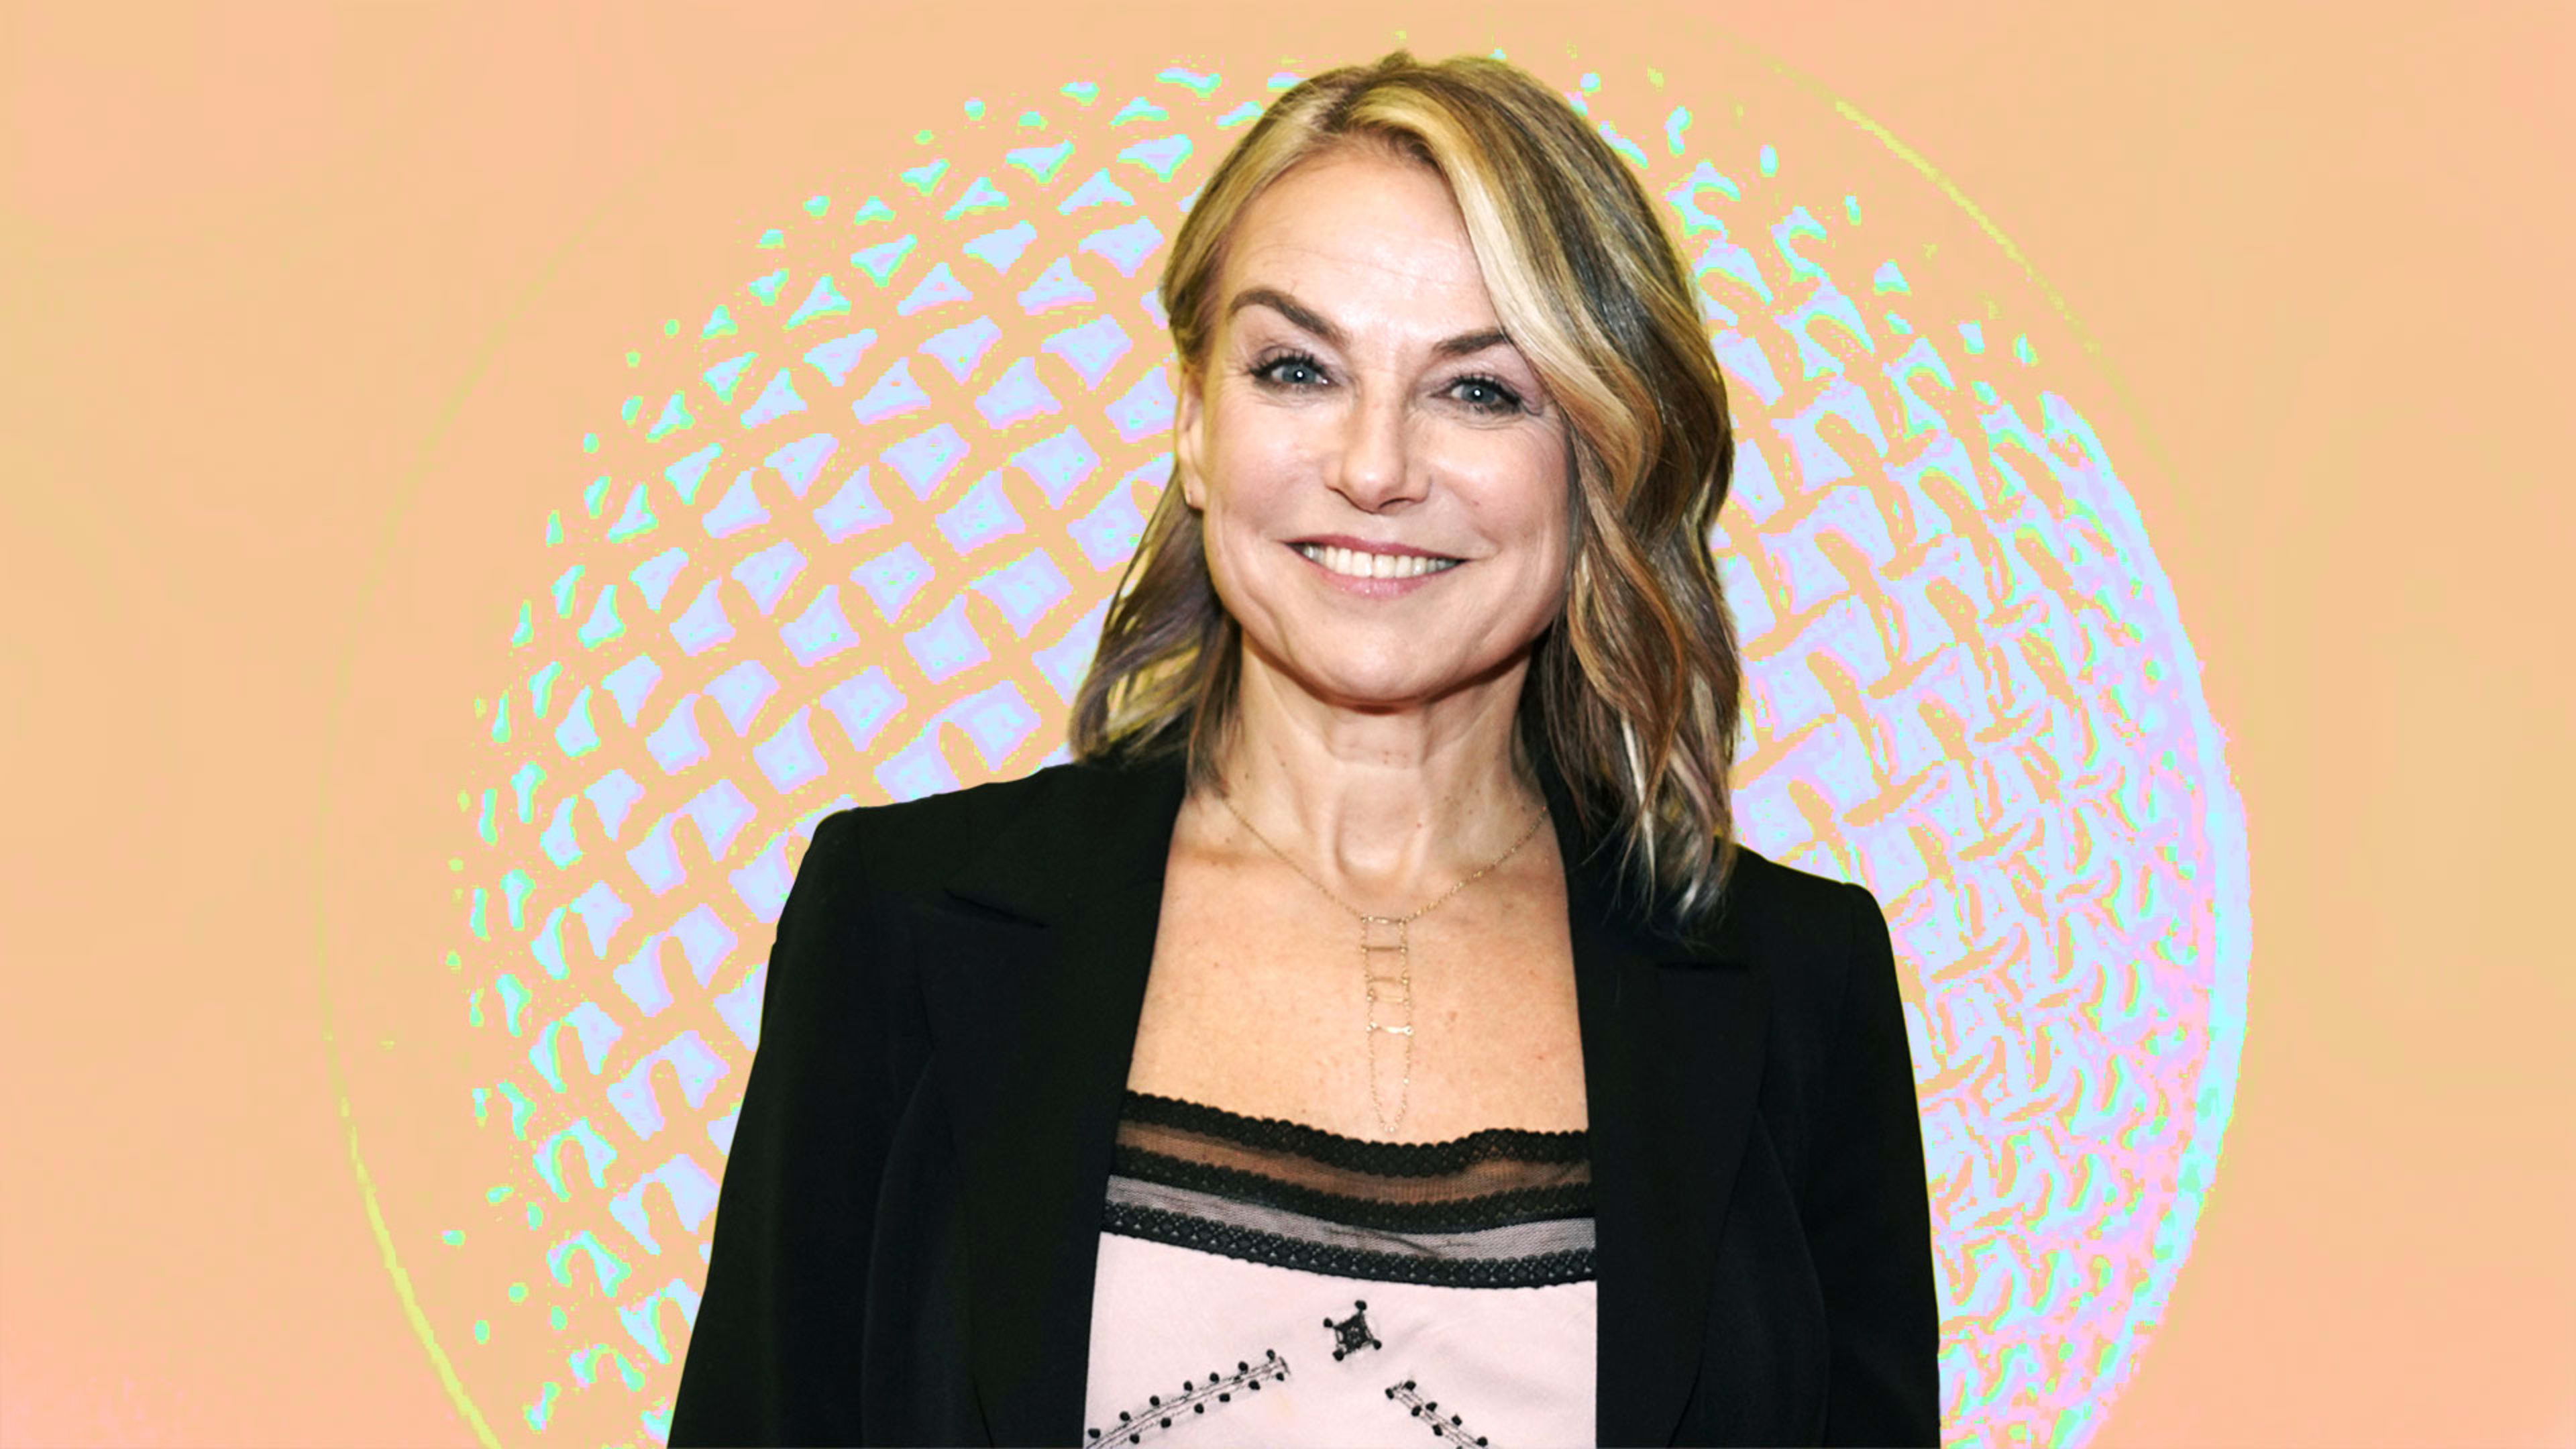 Esther Perel’s new podcast is about the relationships we have at work